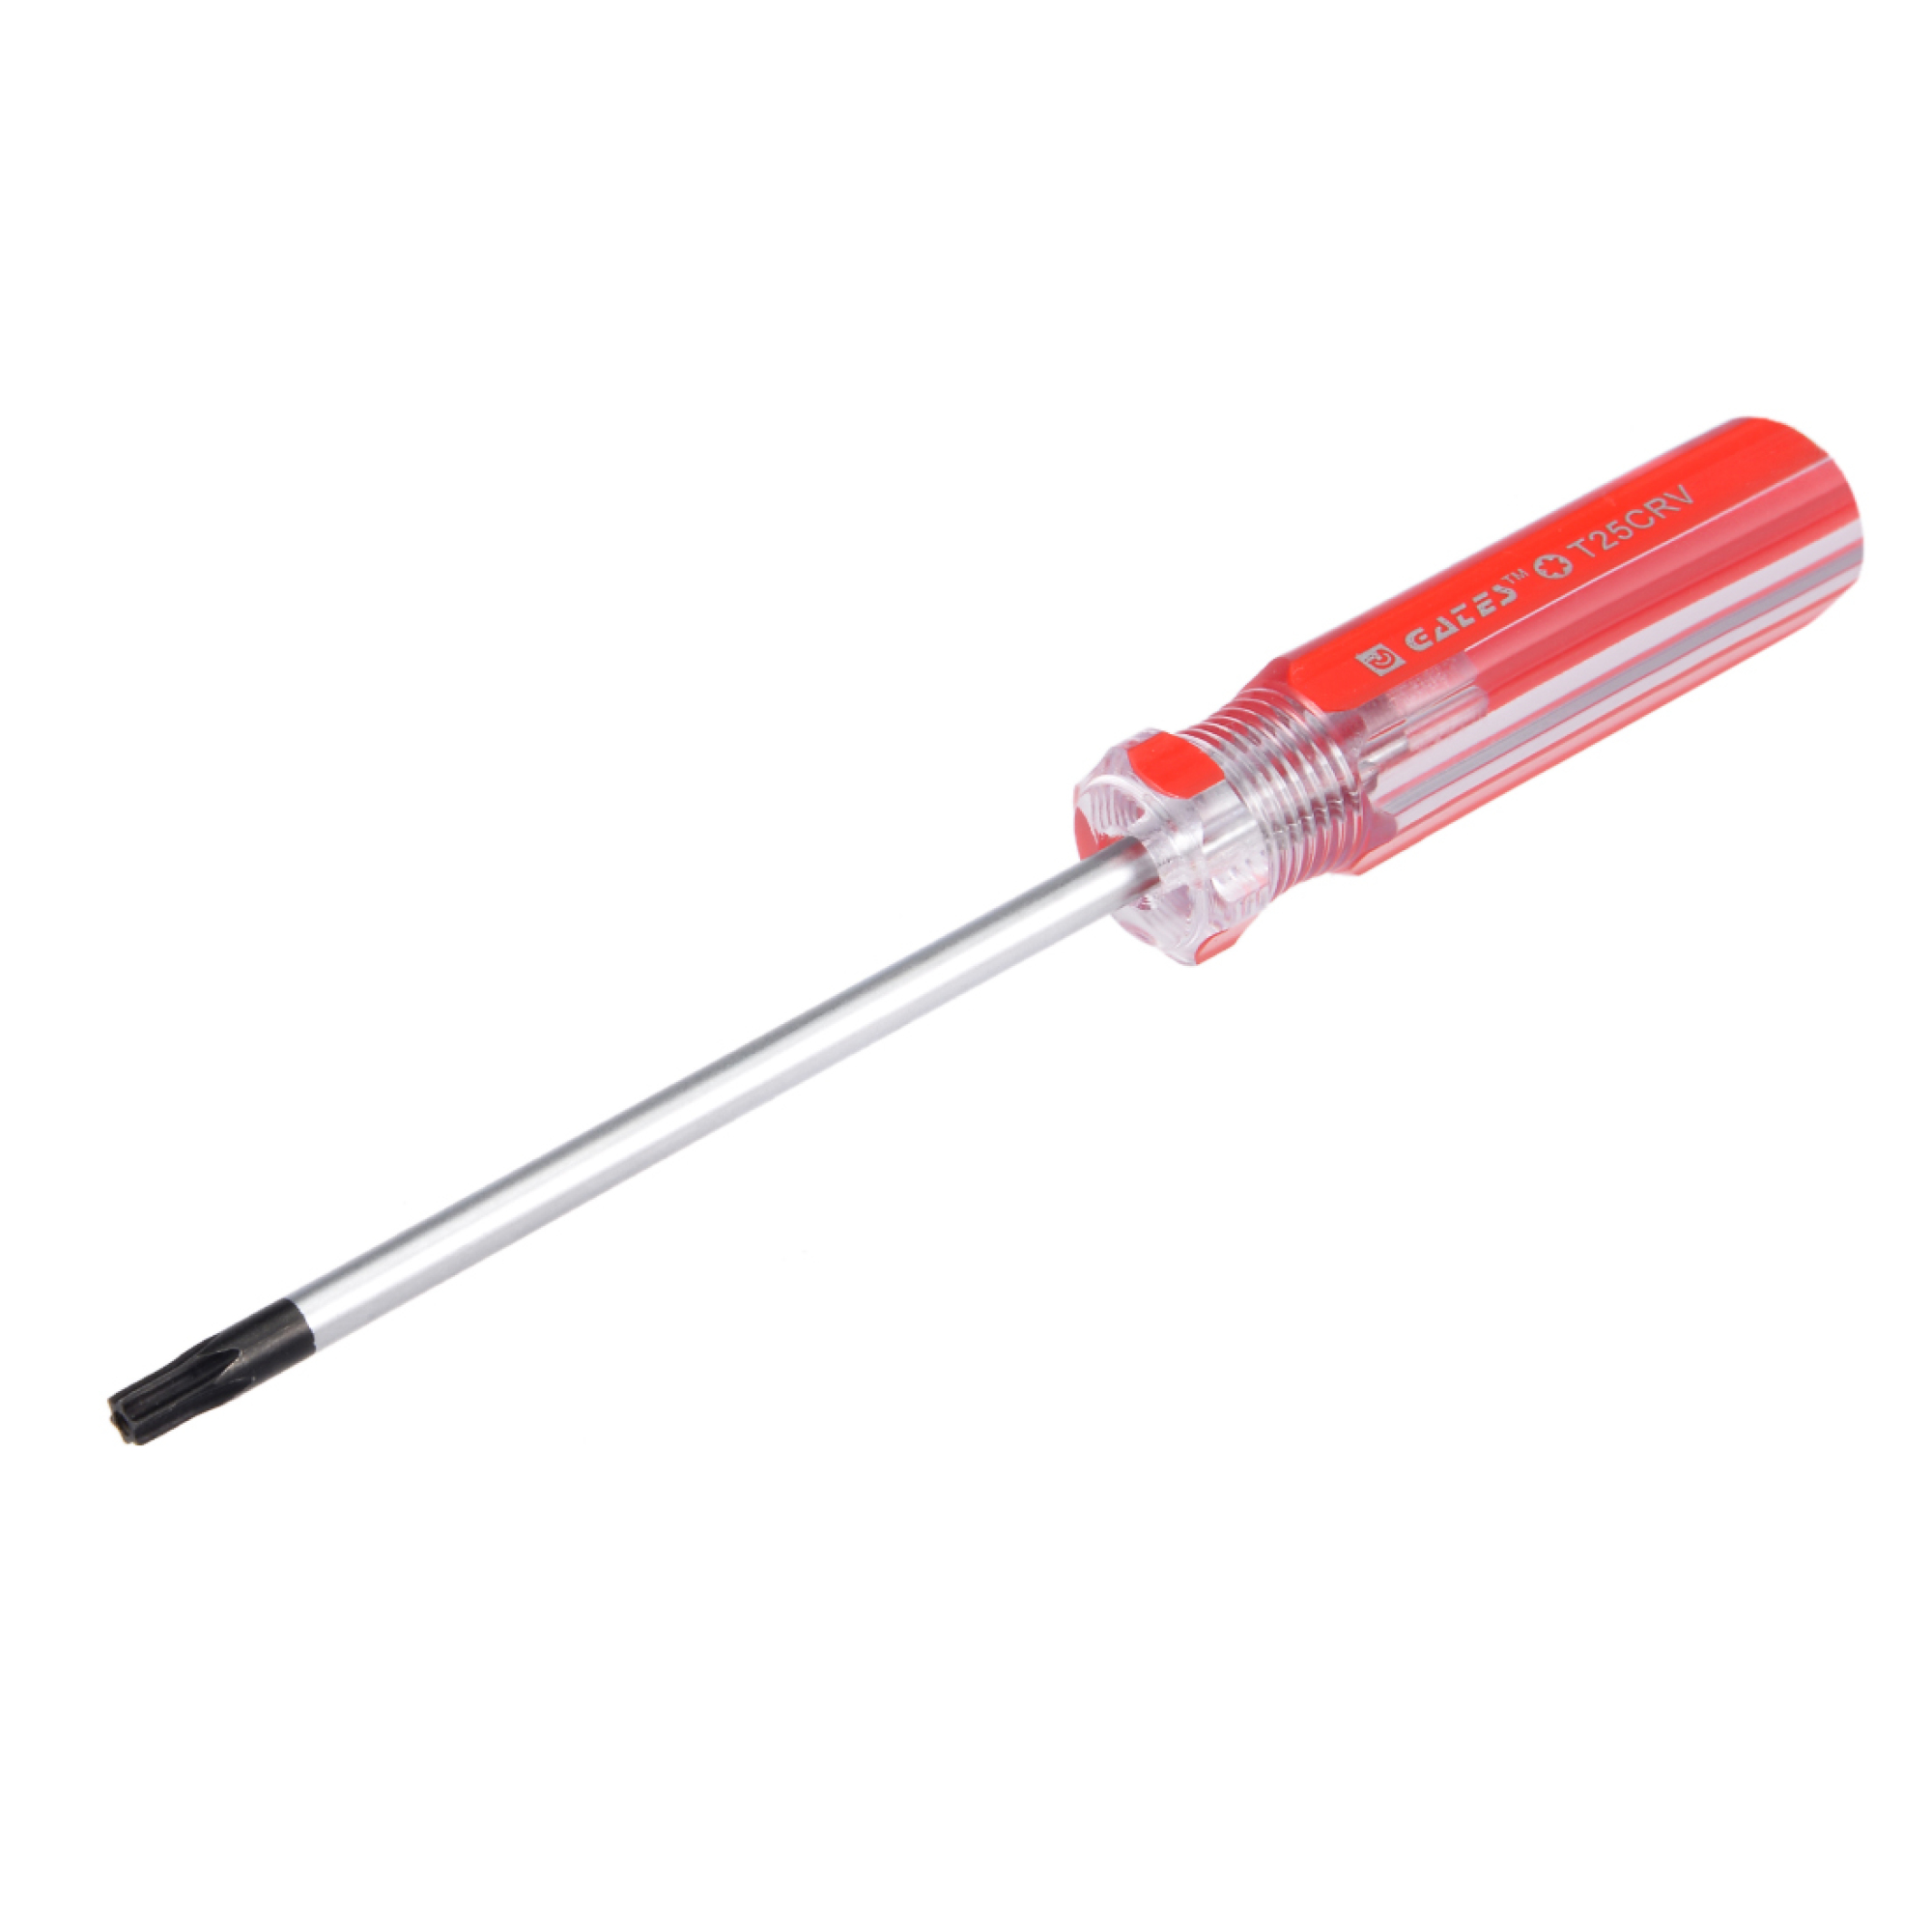 T25 Security Magnetic Torx Screwdriver with 100mm Shaft